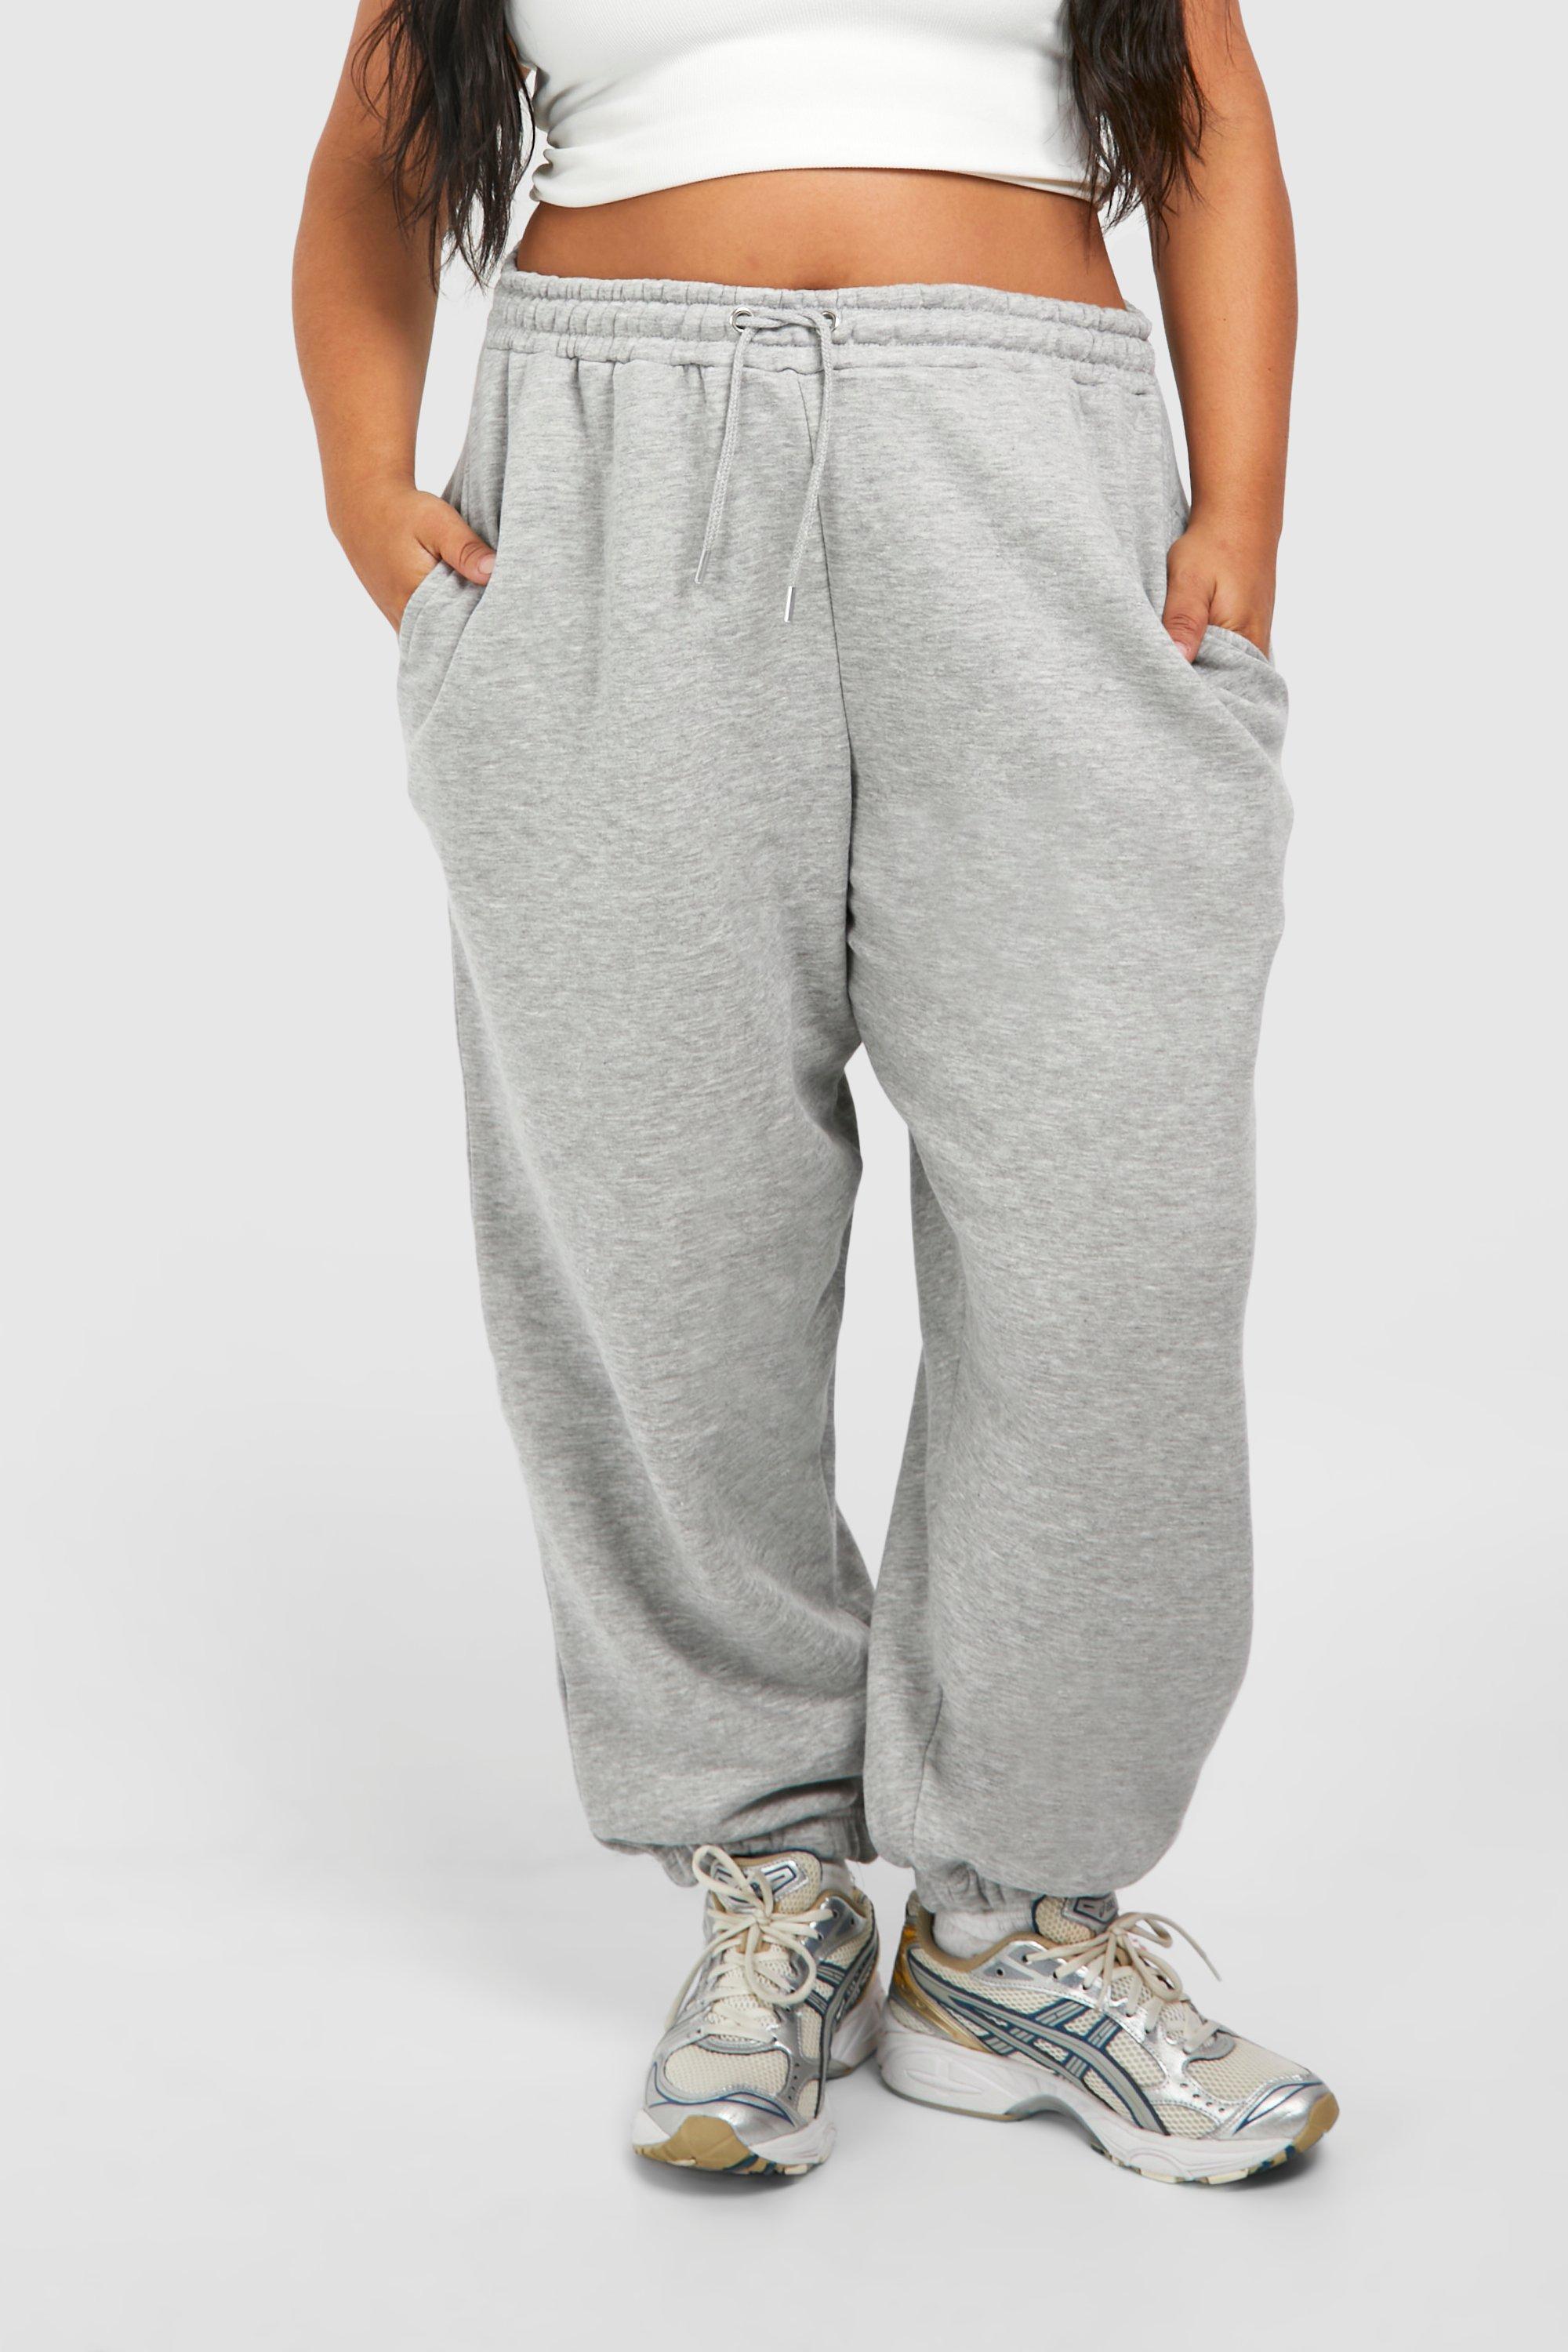 Buy Charcoal Grey Open Hem Joggers from the Next UK online shop